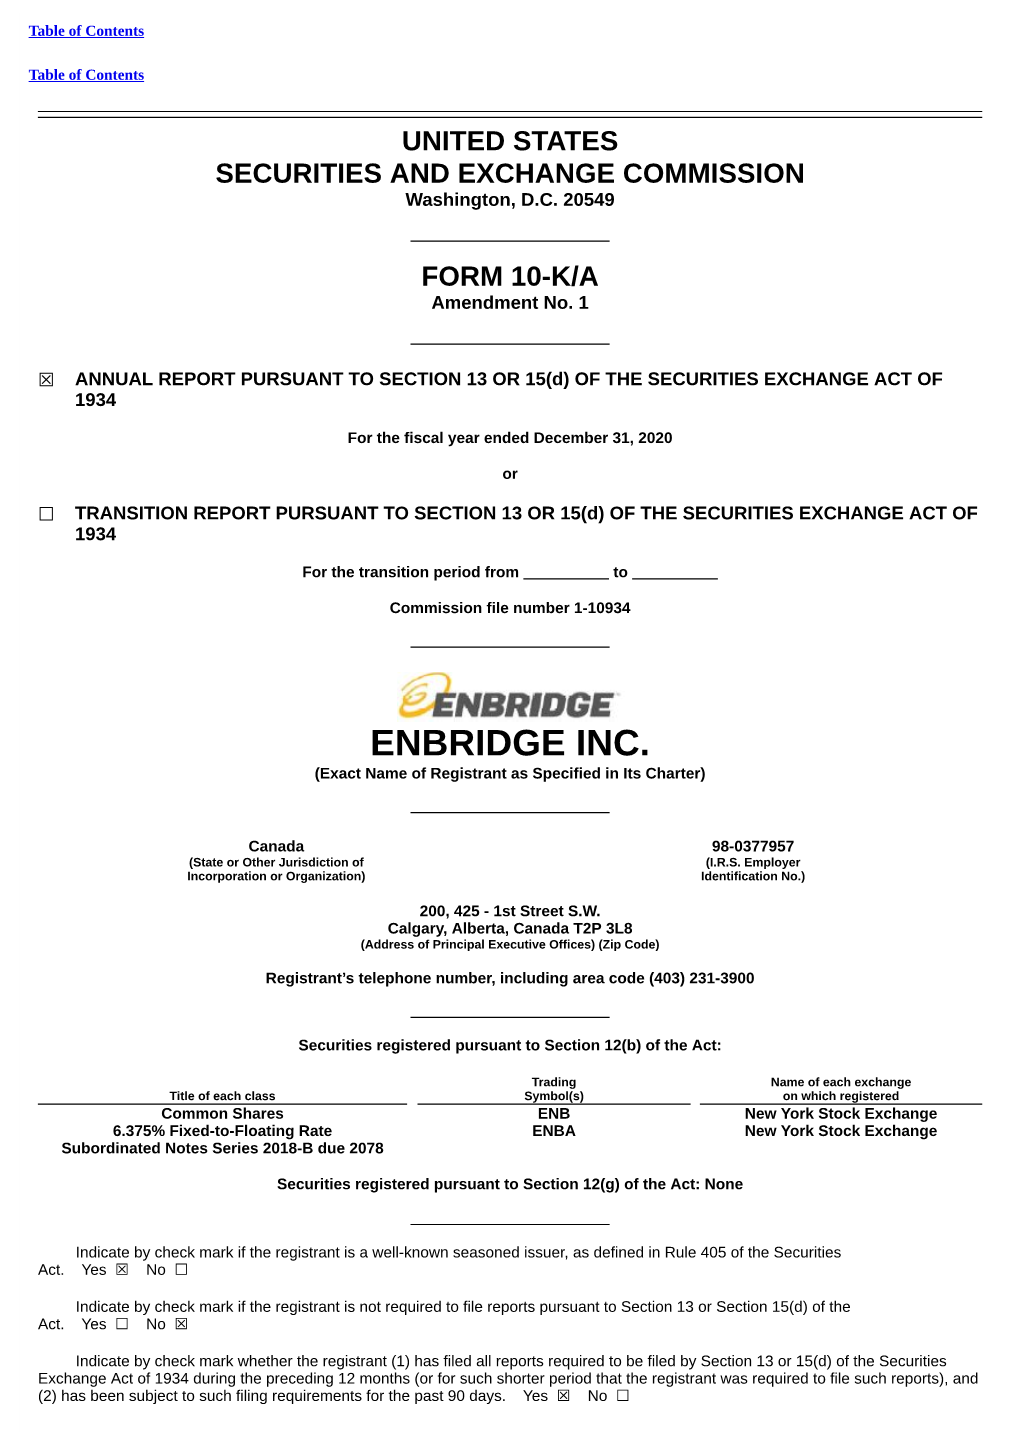 ENBRIDGE INC. (Exact Name of Registrant As Specified in Its Charter)